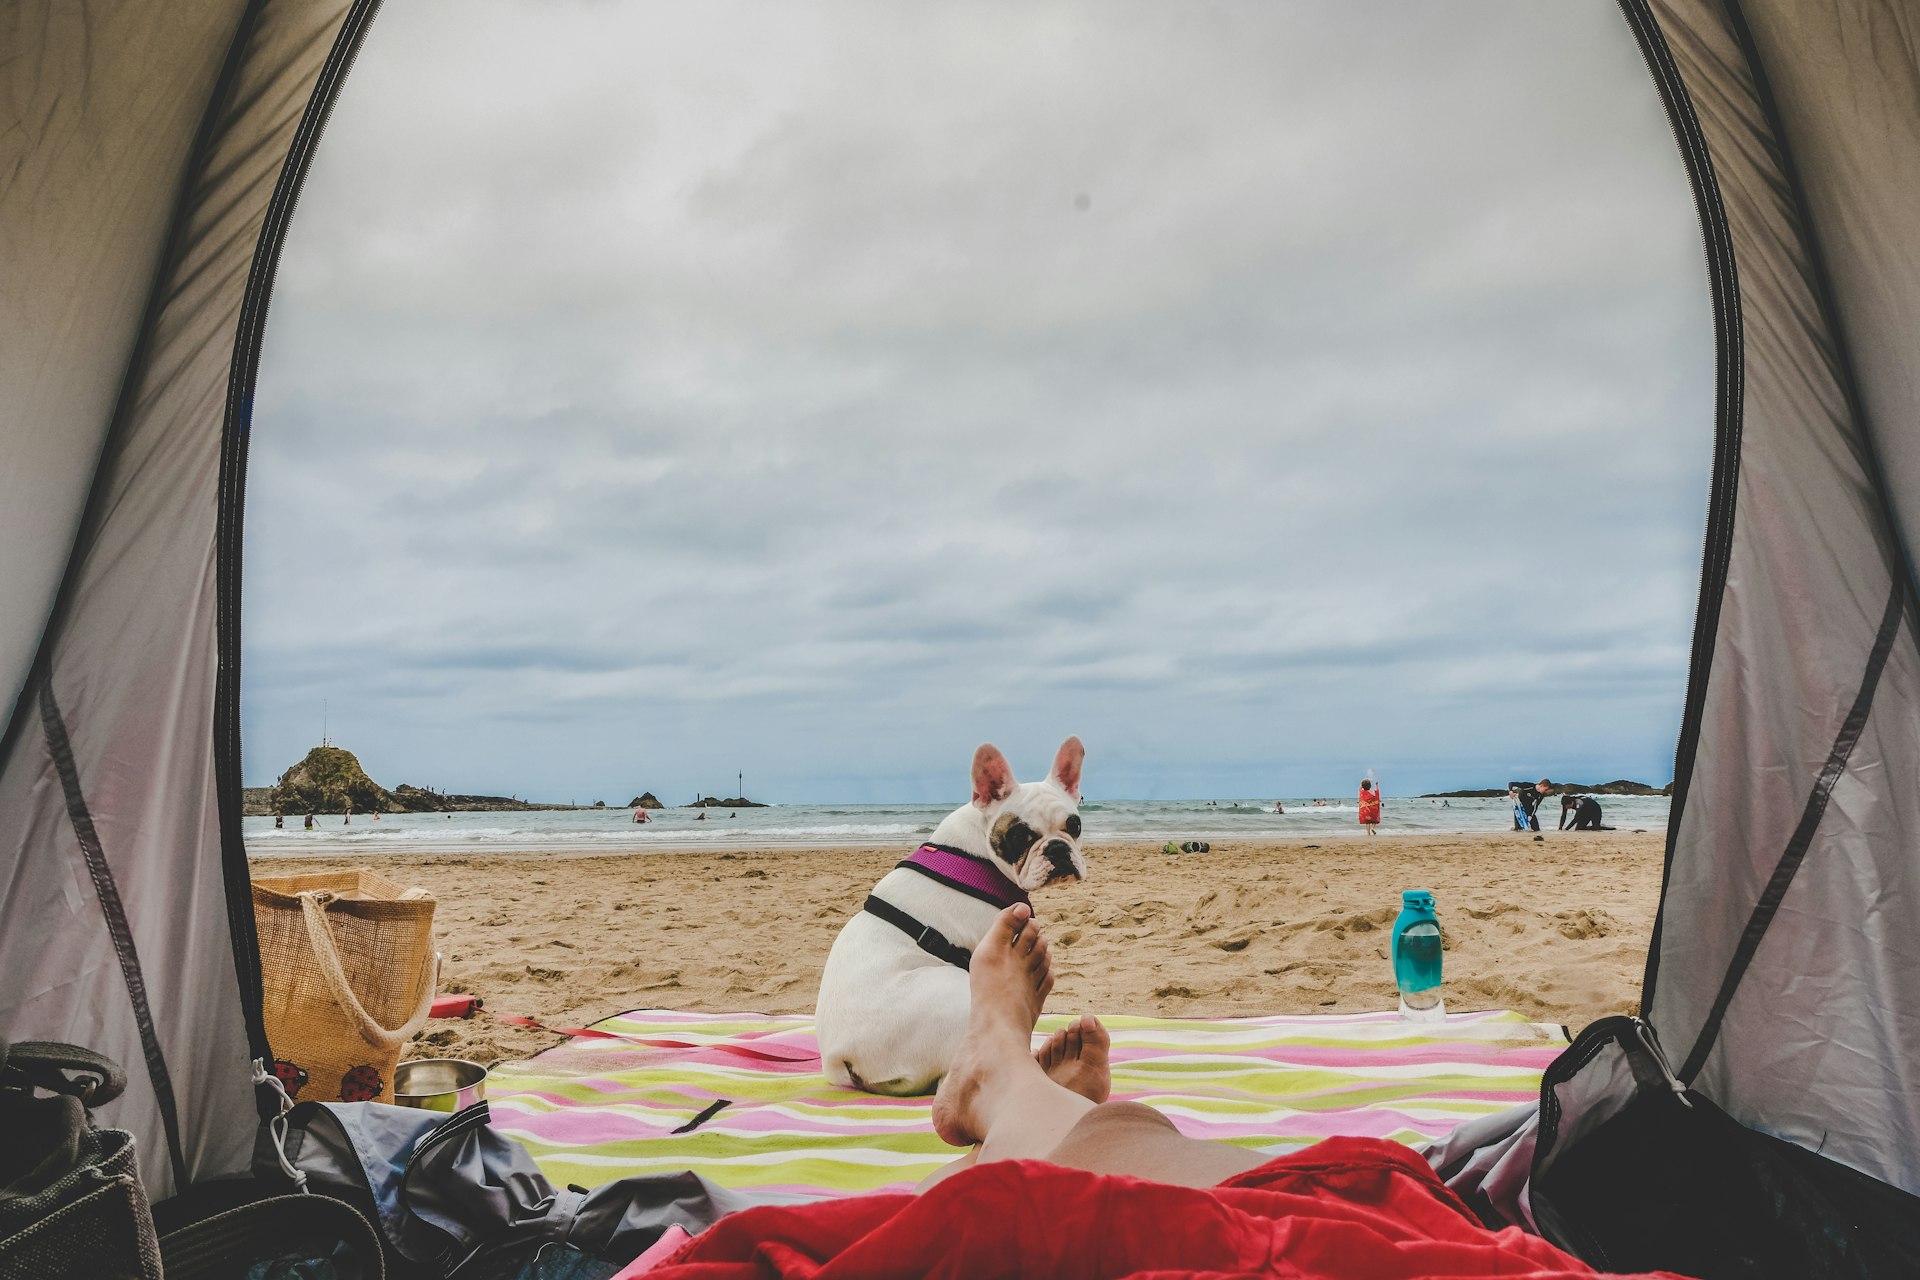 Camping with dog at Summerleaze Beach in Bude, Cornwall